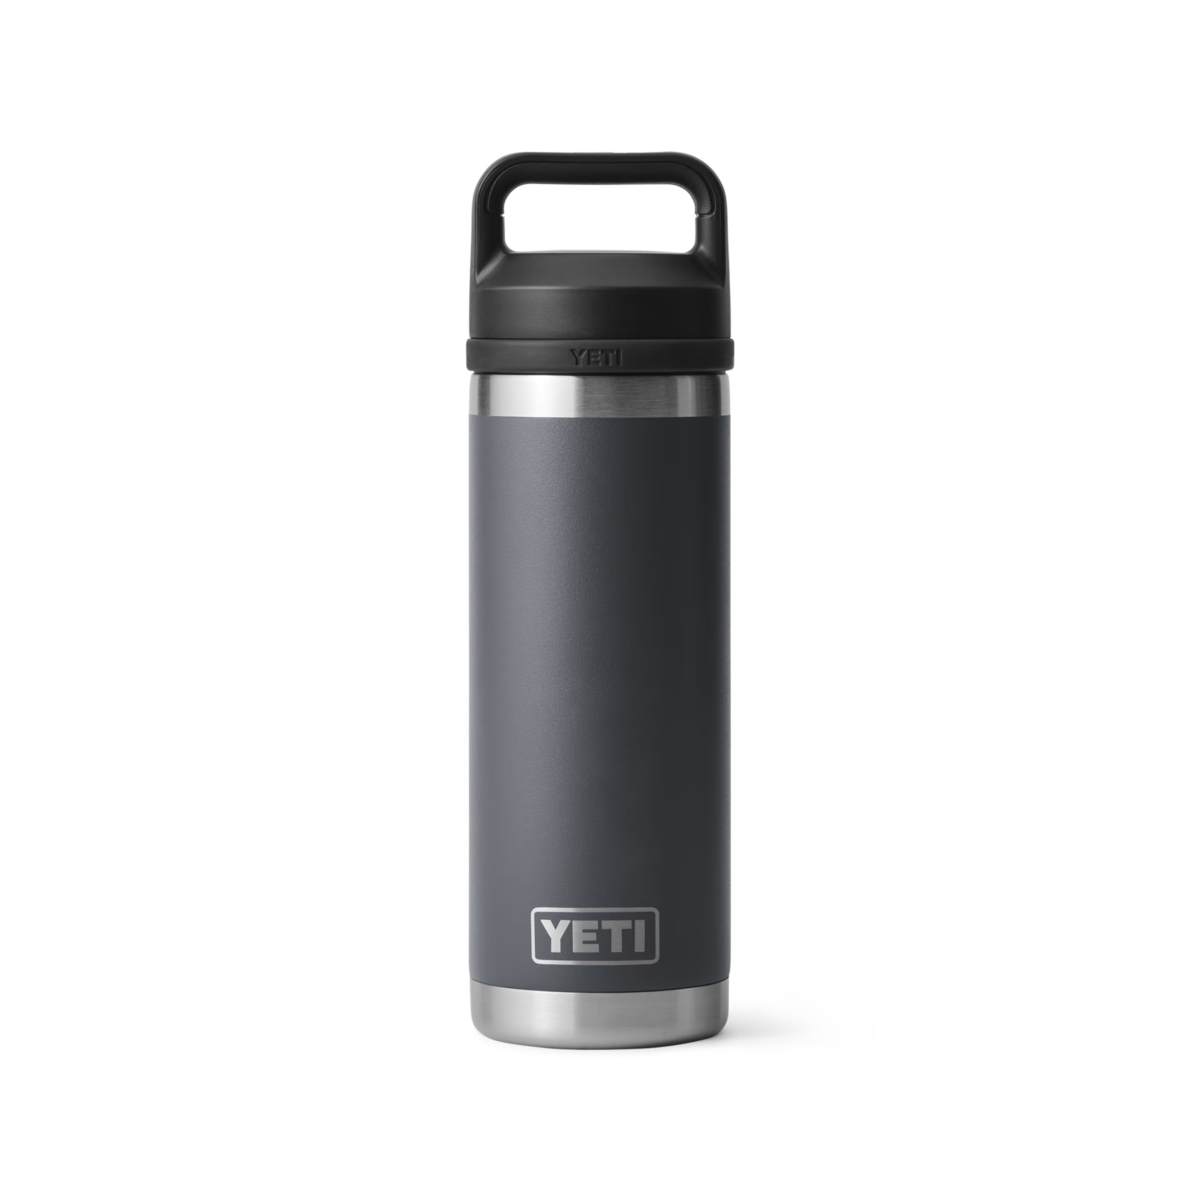 Yeti 18oz Bottle with Chug Cap in Charcoal